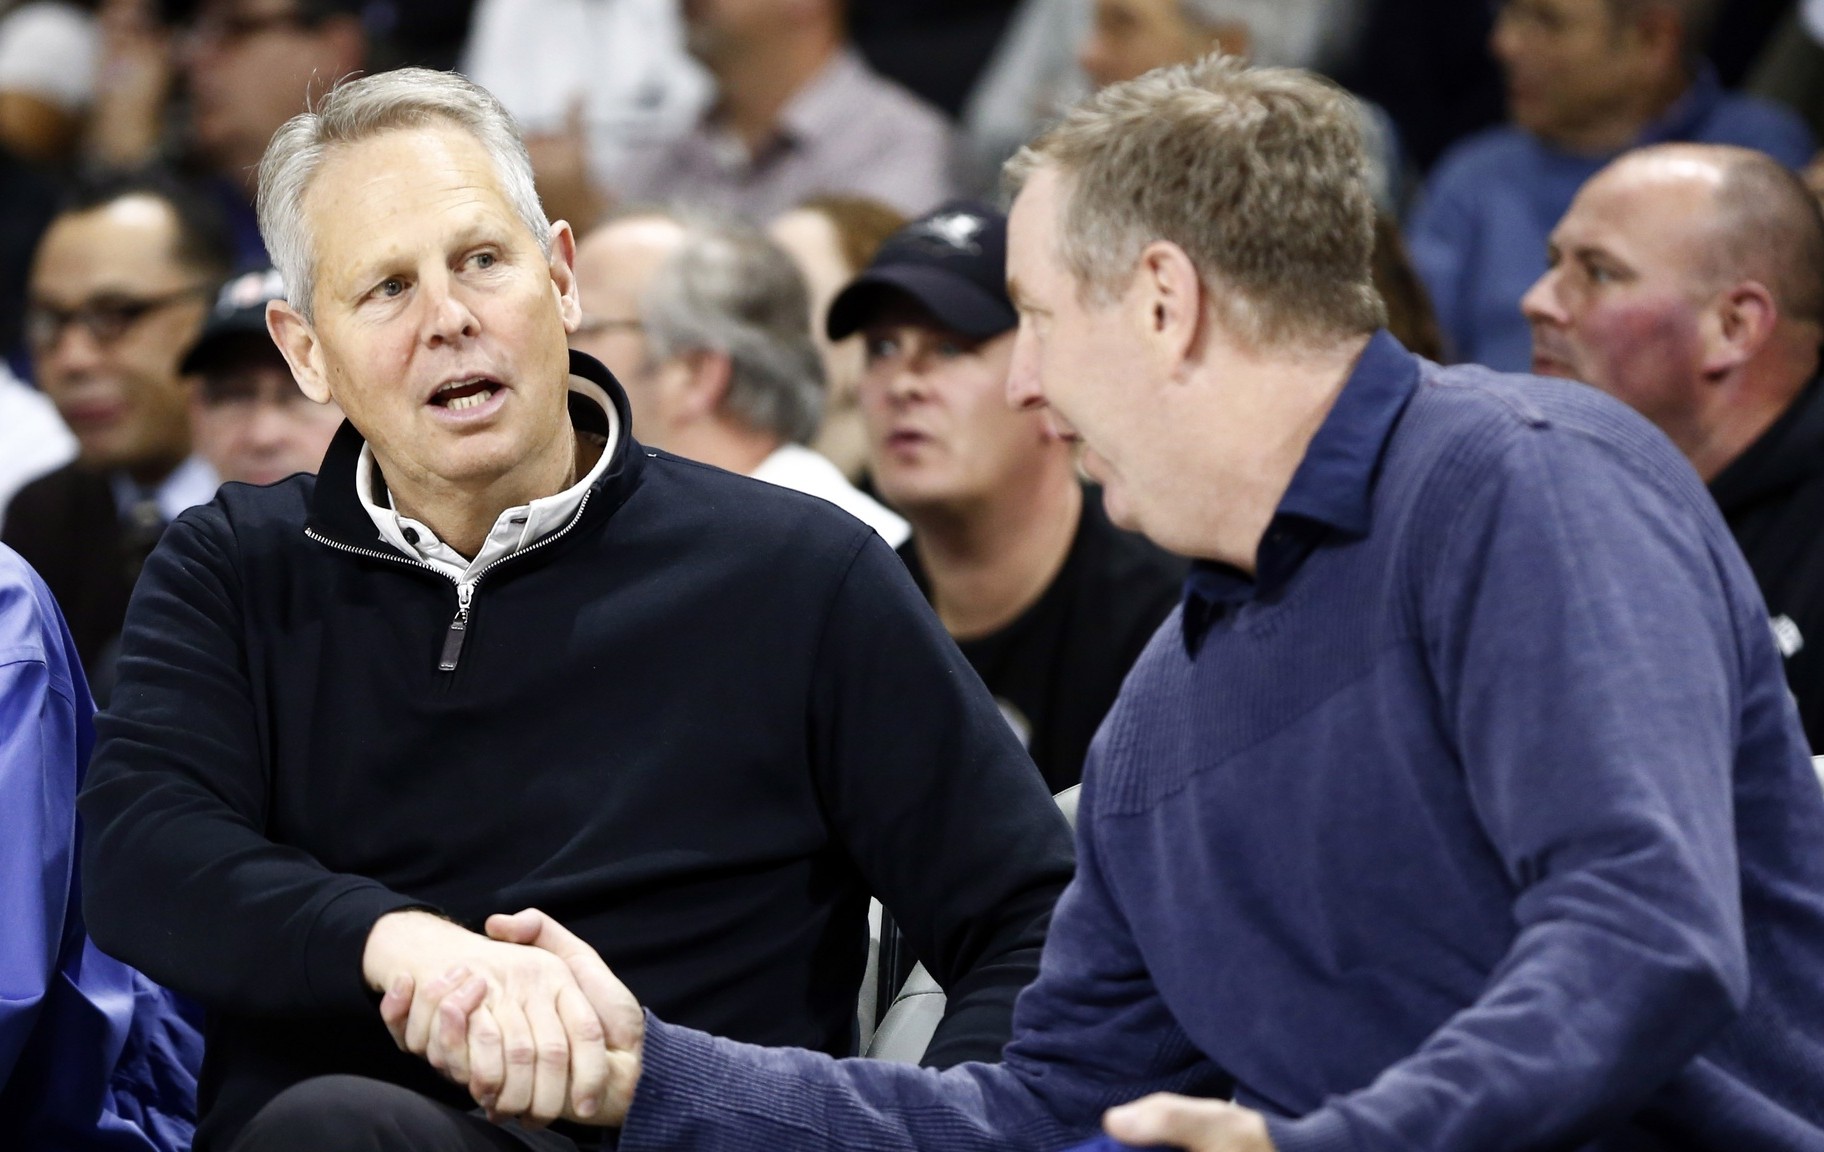 WATCH: Danny Ainge gets pwned by son, Crew Ainge1824 x 1152